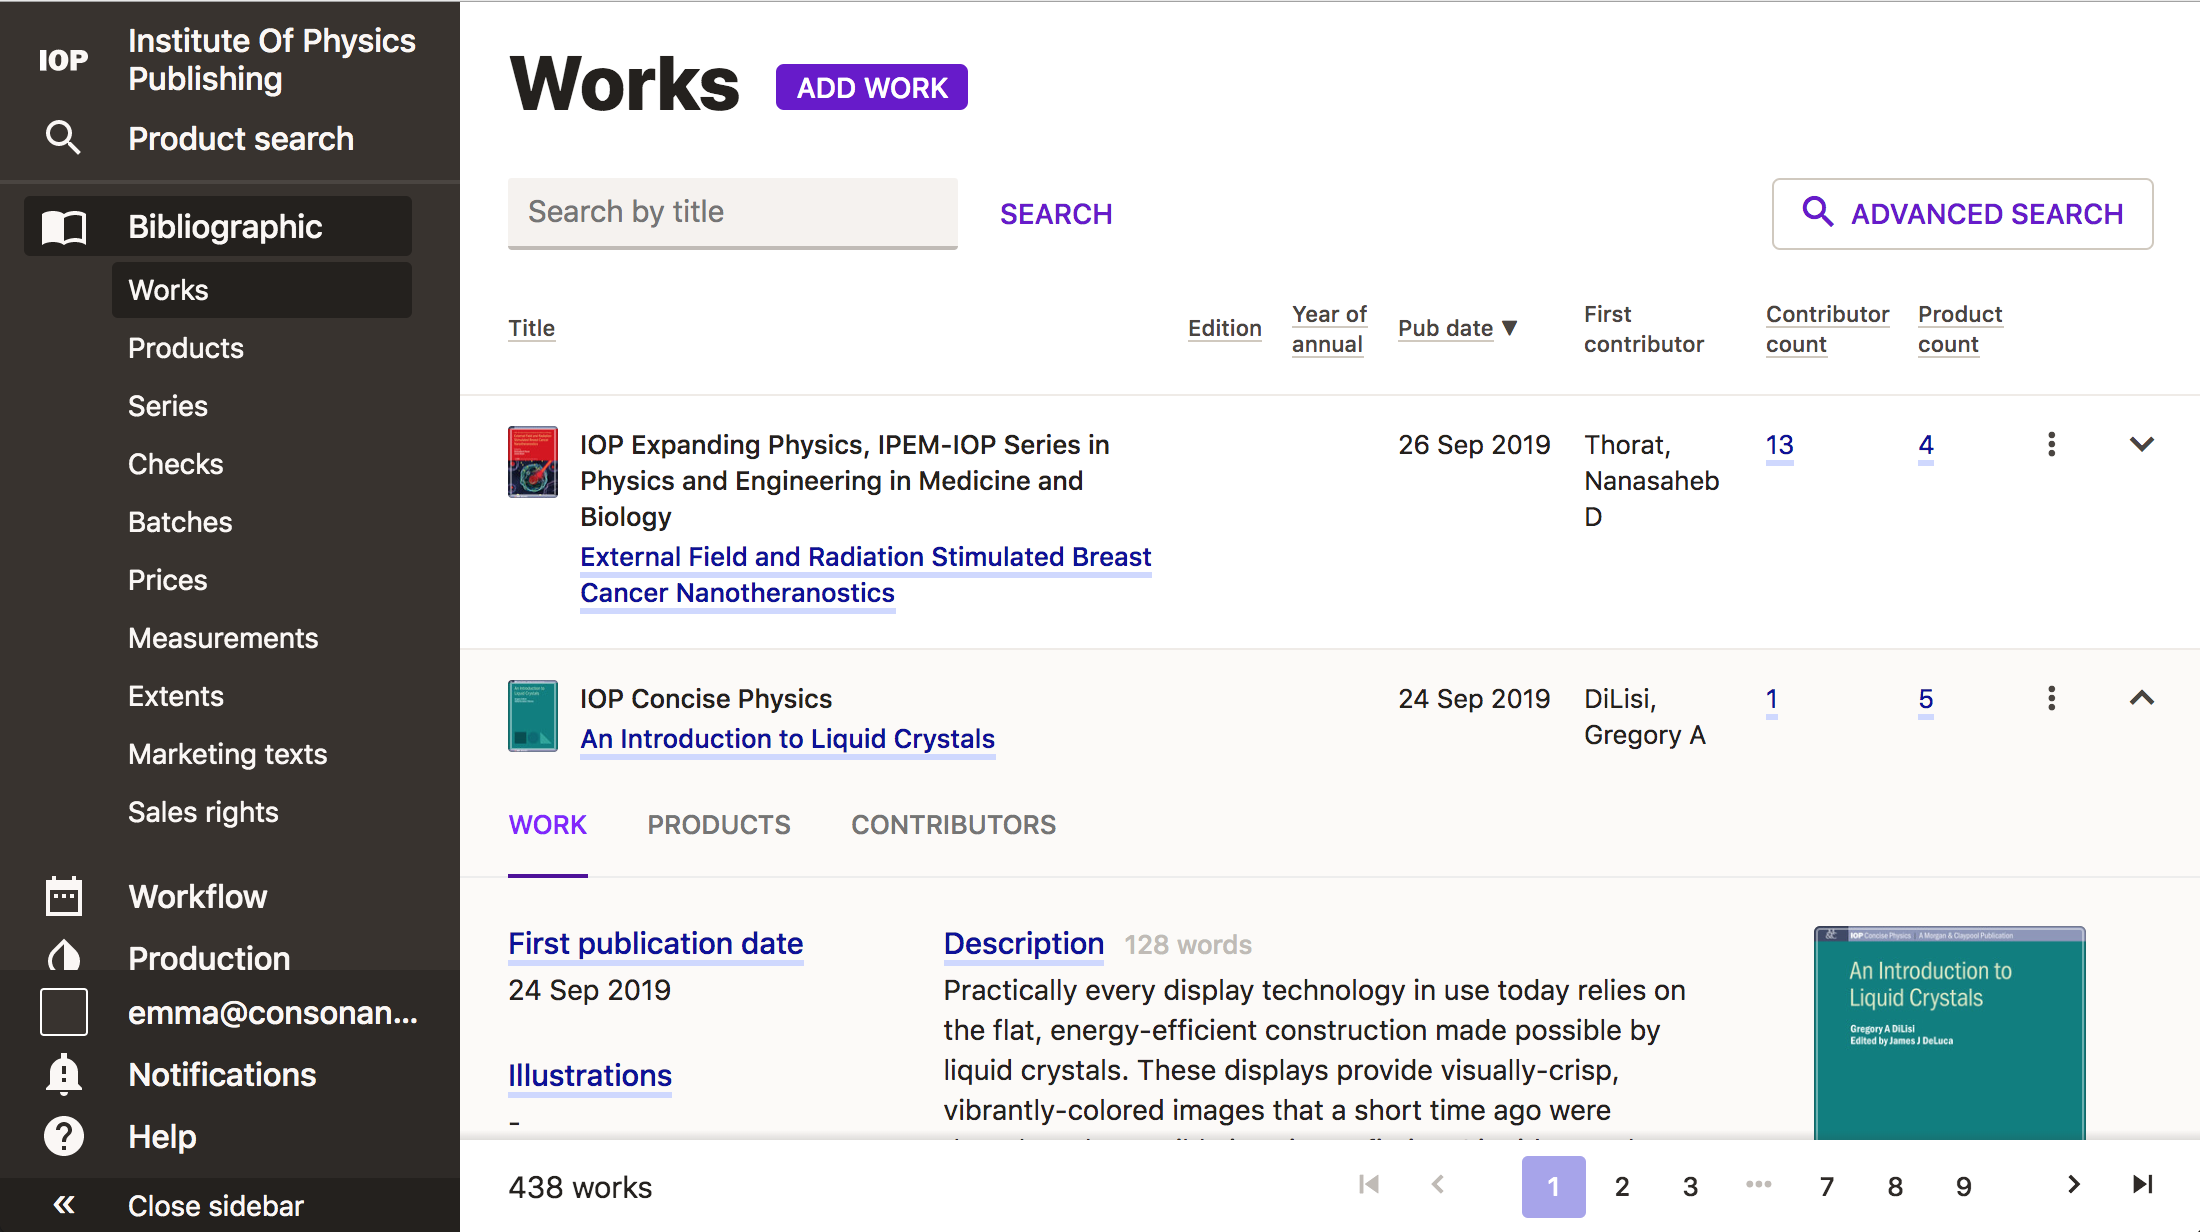 Screenshot showing the works listing page.